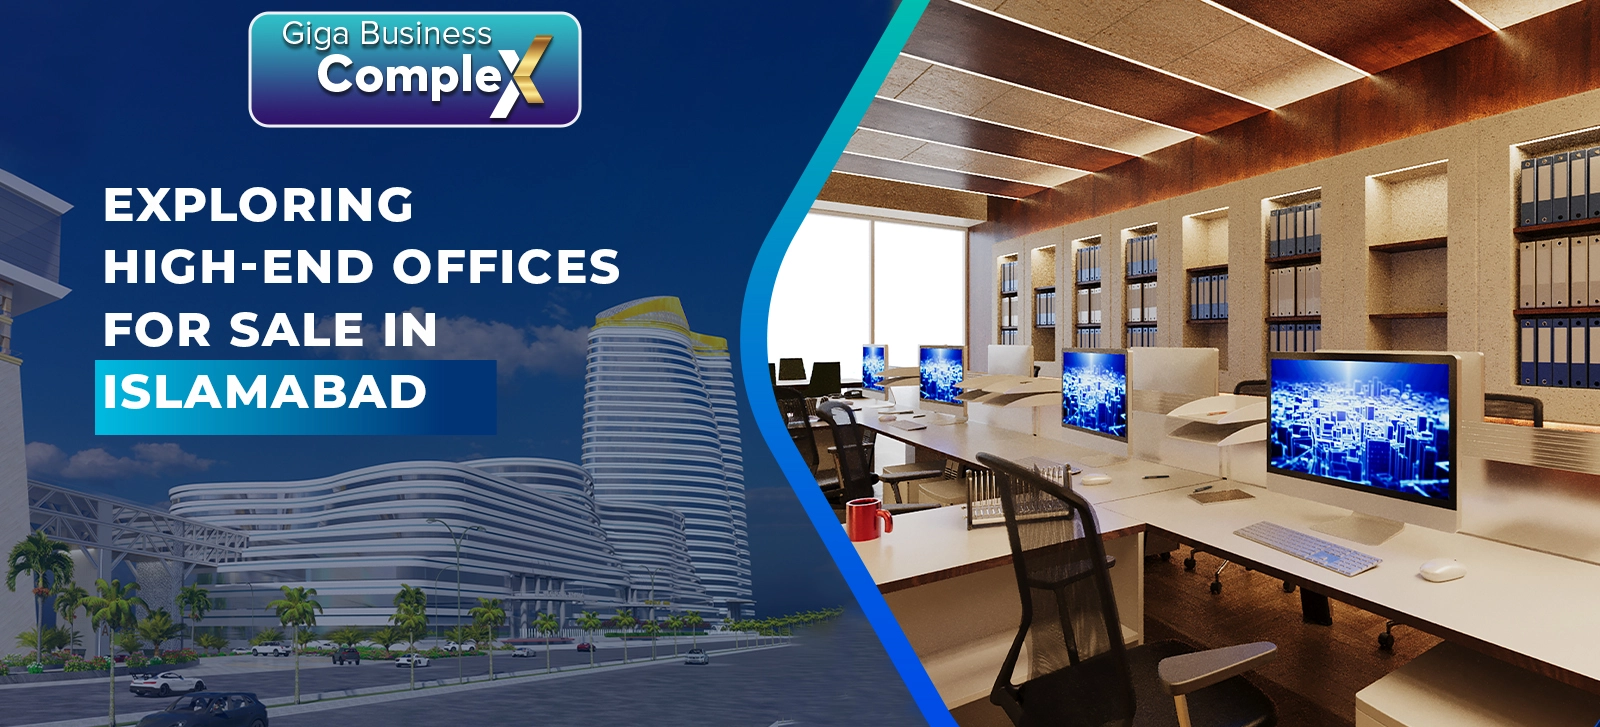 Offices for sale in Islamabad